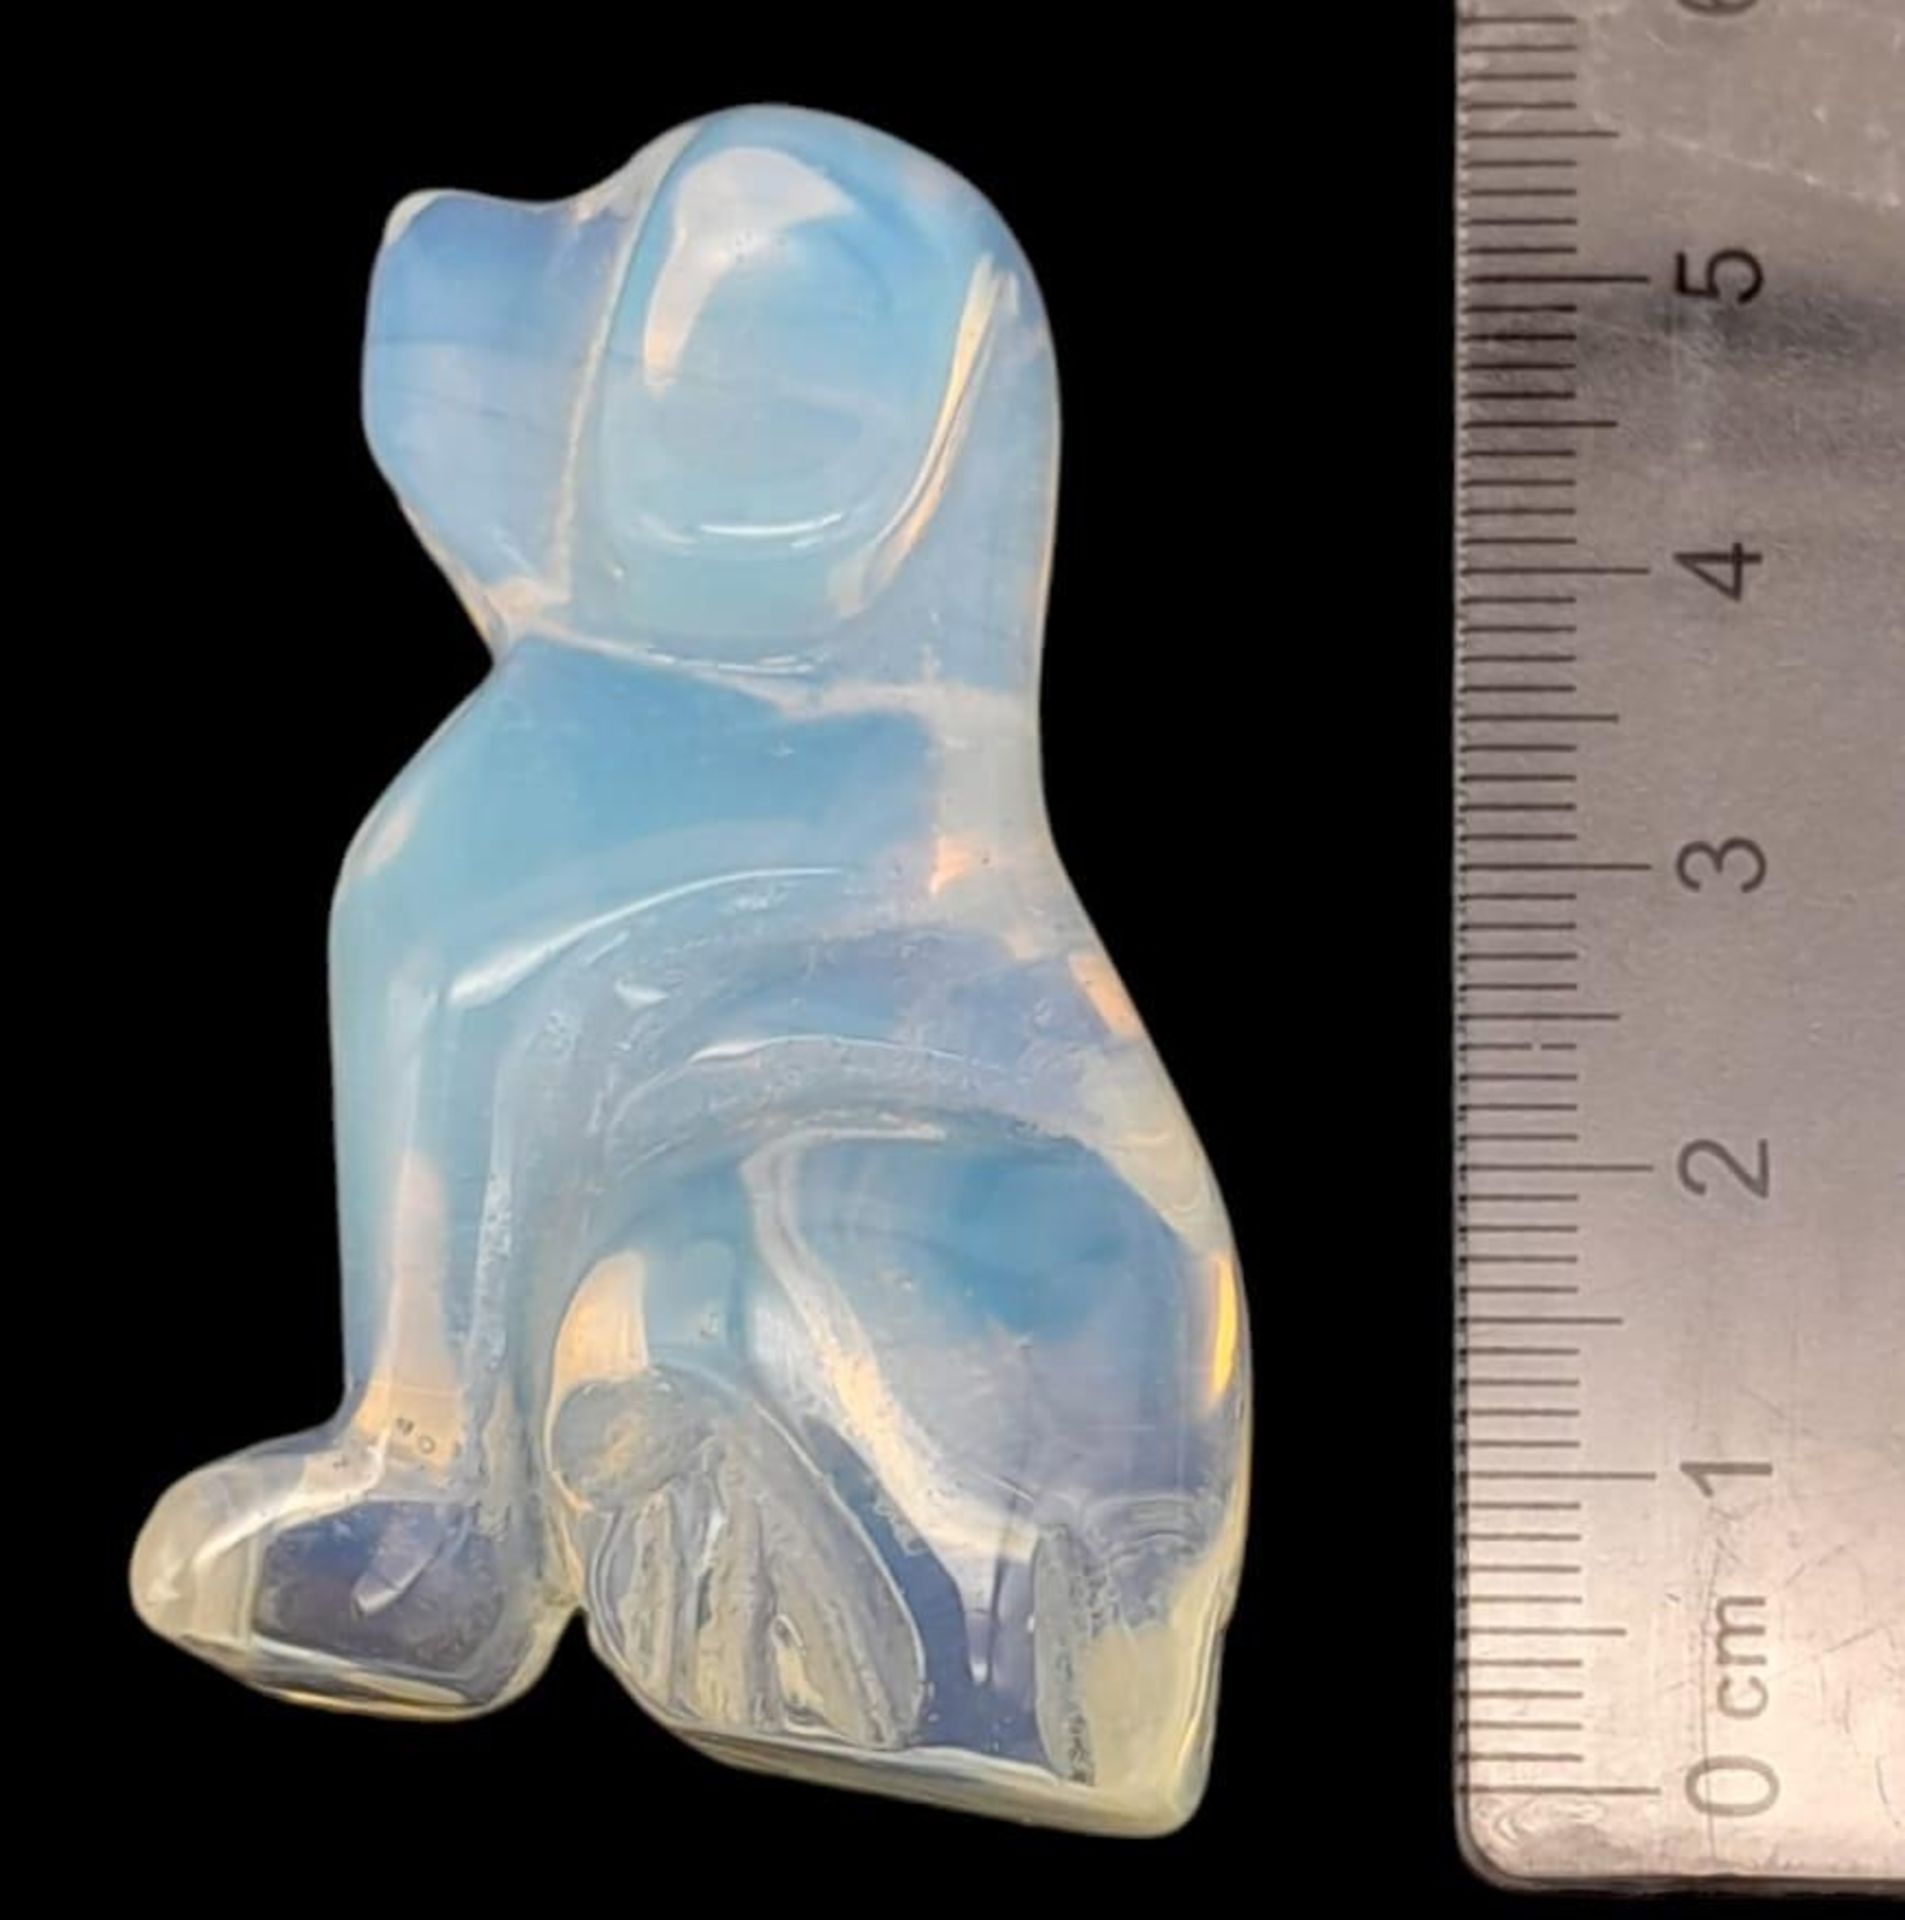 Parcel of 4 Opalite Figurines. Featuring a Dog, Skull, Heart & Moon. - Image 3 of 4